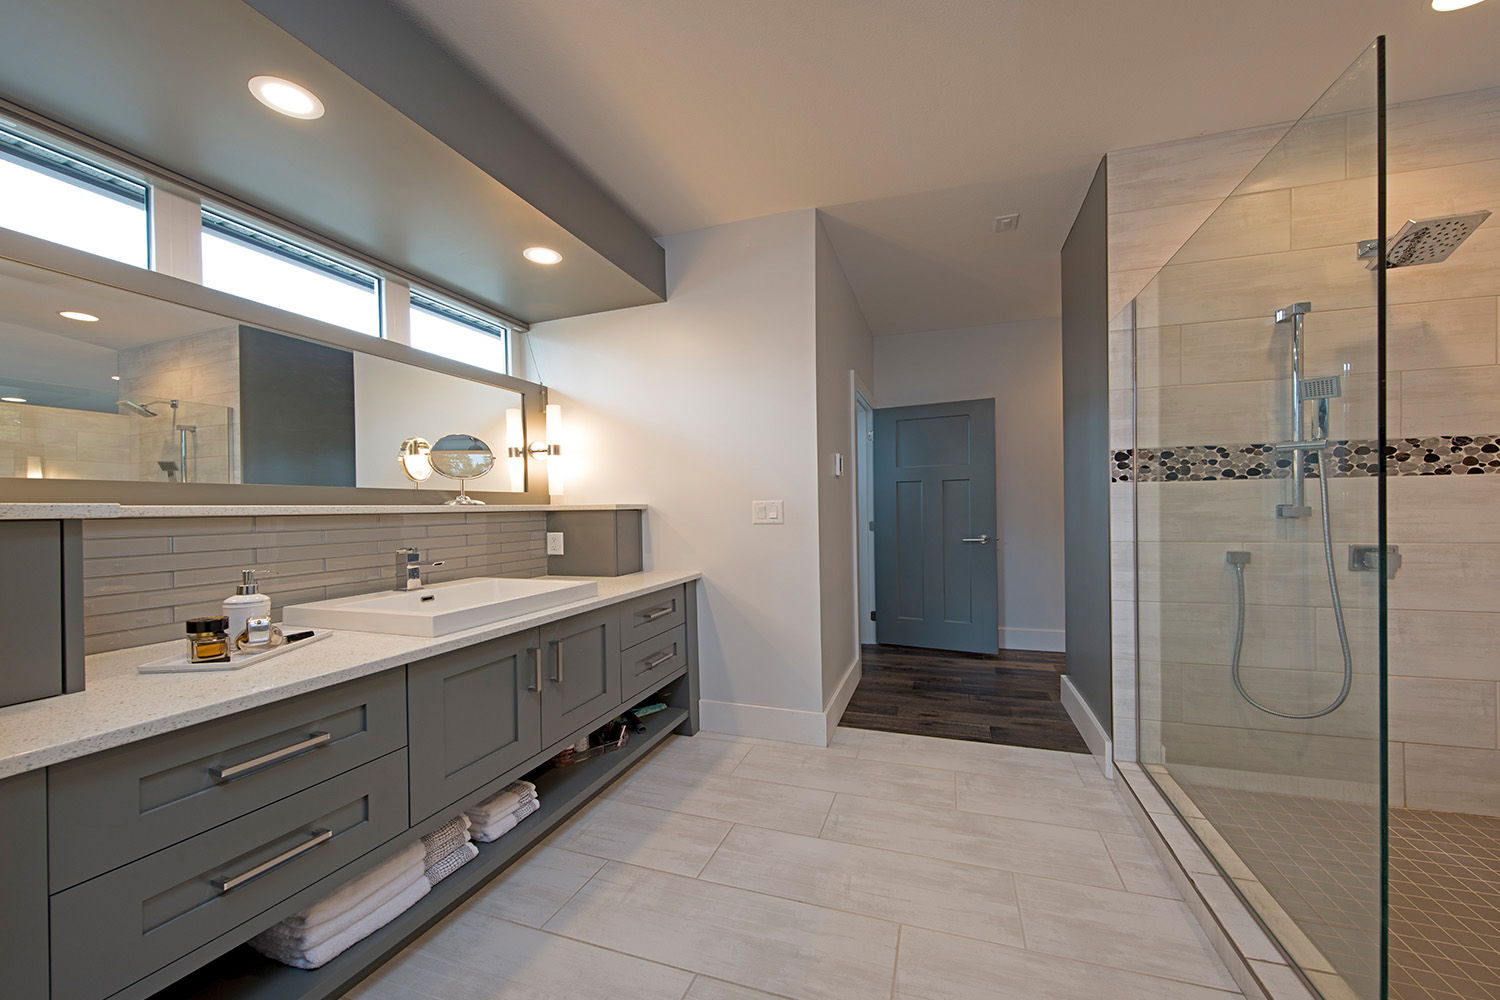 spacious modern bathroom with white tile and grey cabinets, thin skylight window and rain shower